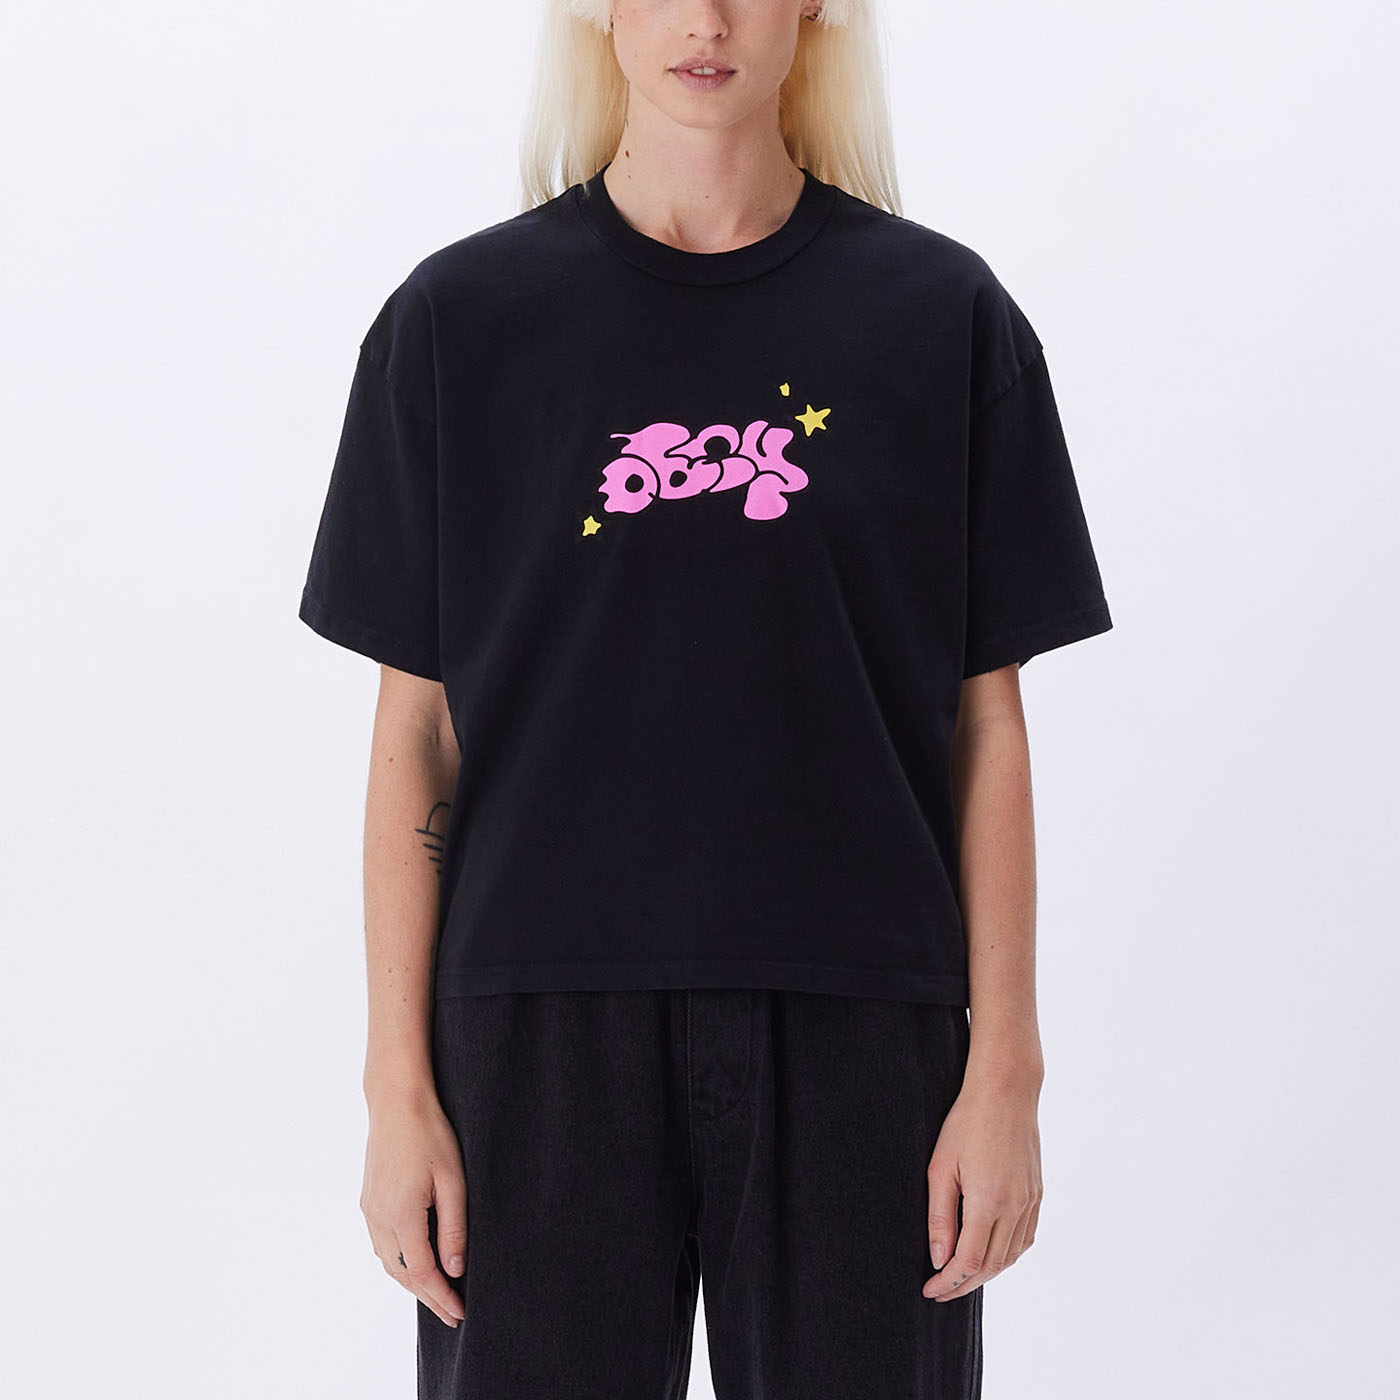 Women's Tops at OBEY Clothing UK - Long and Short Sleeves